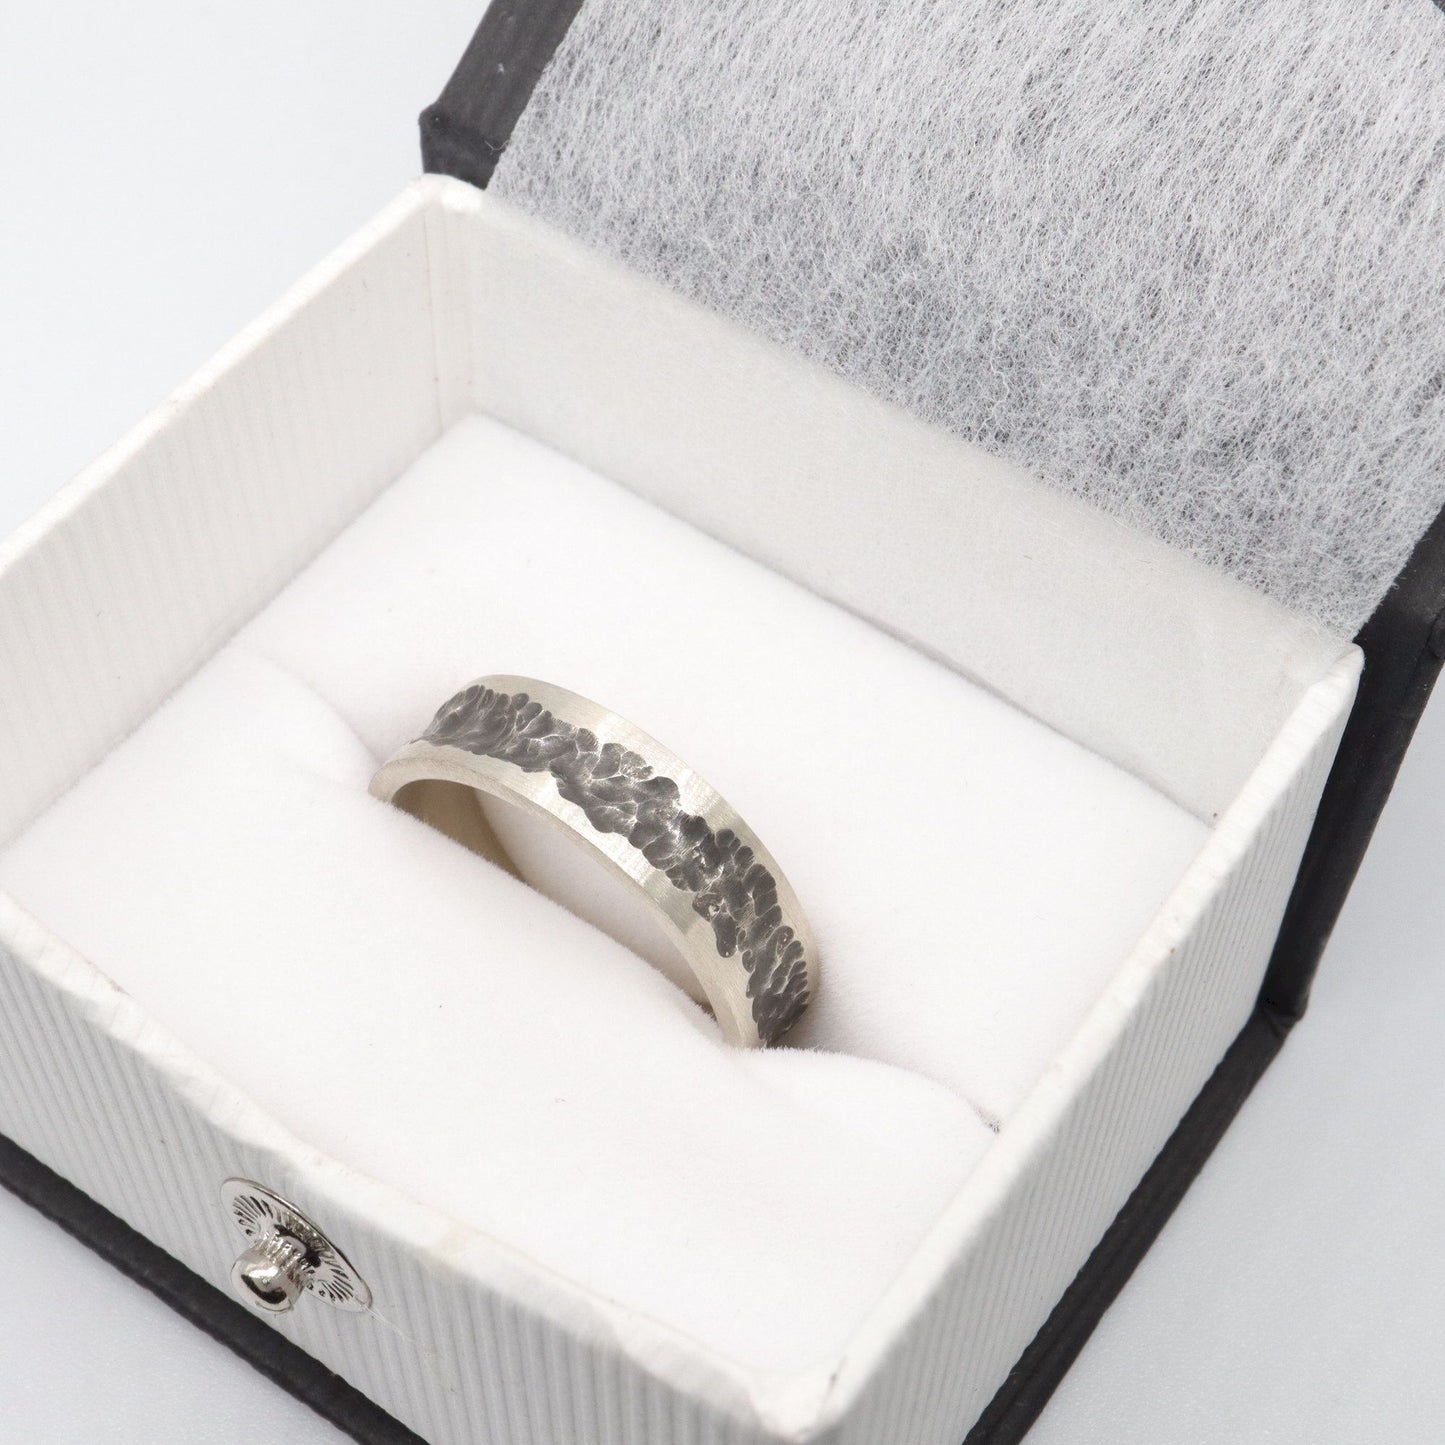 Mens wedding, promise or engagement ring with a carved out pattern, Cat Bells design.